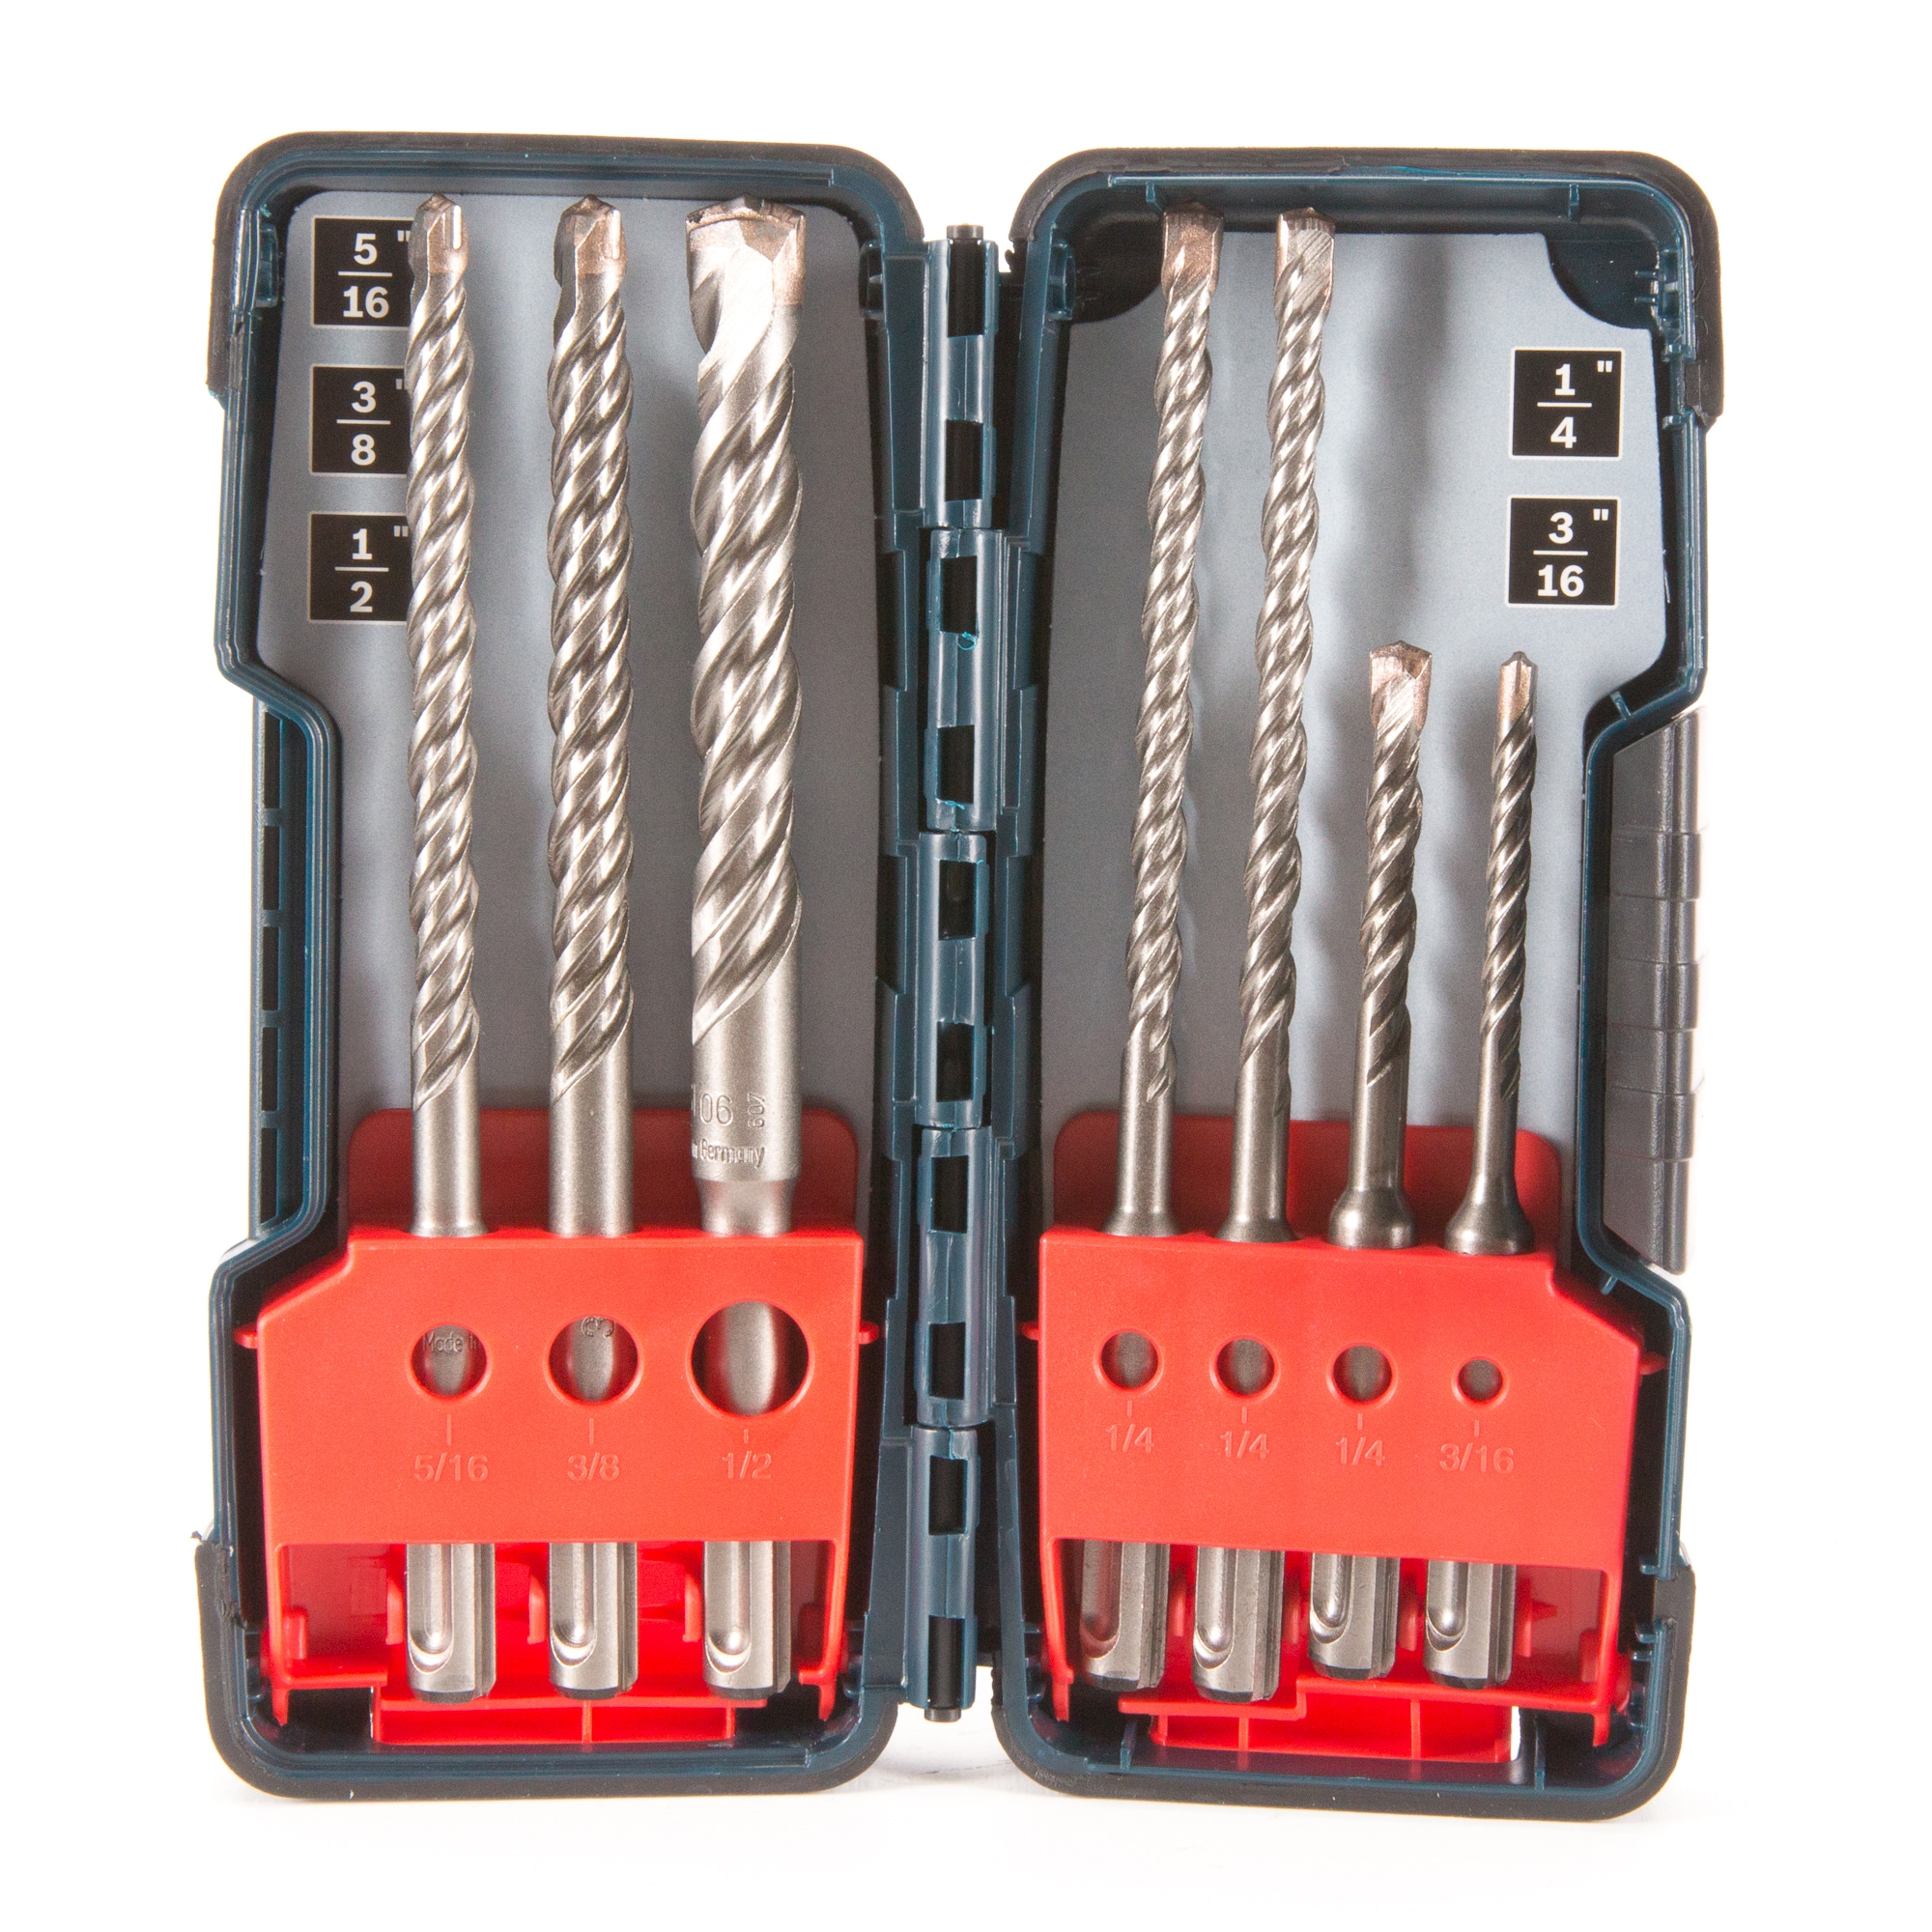 7 Piece wood drill bit set with integral Countersinks in wooden case 